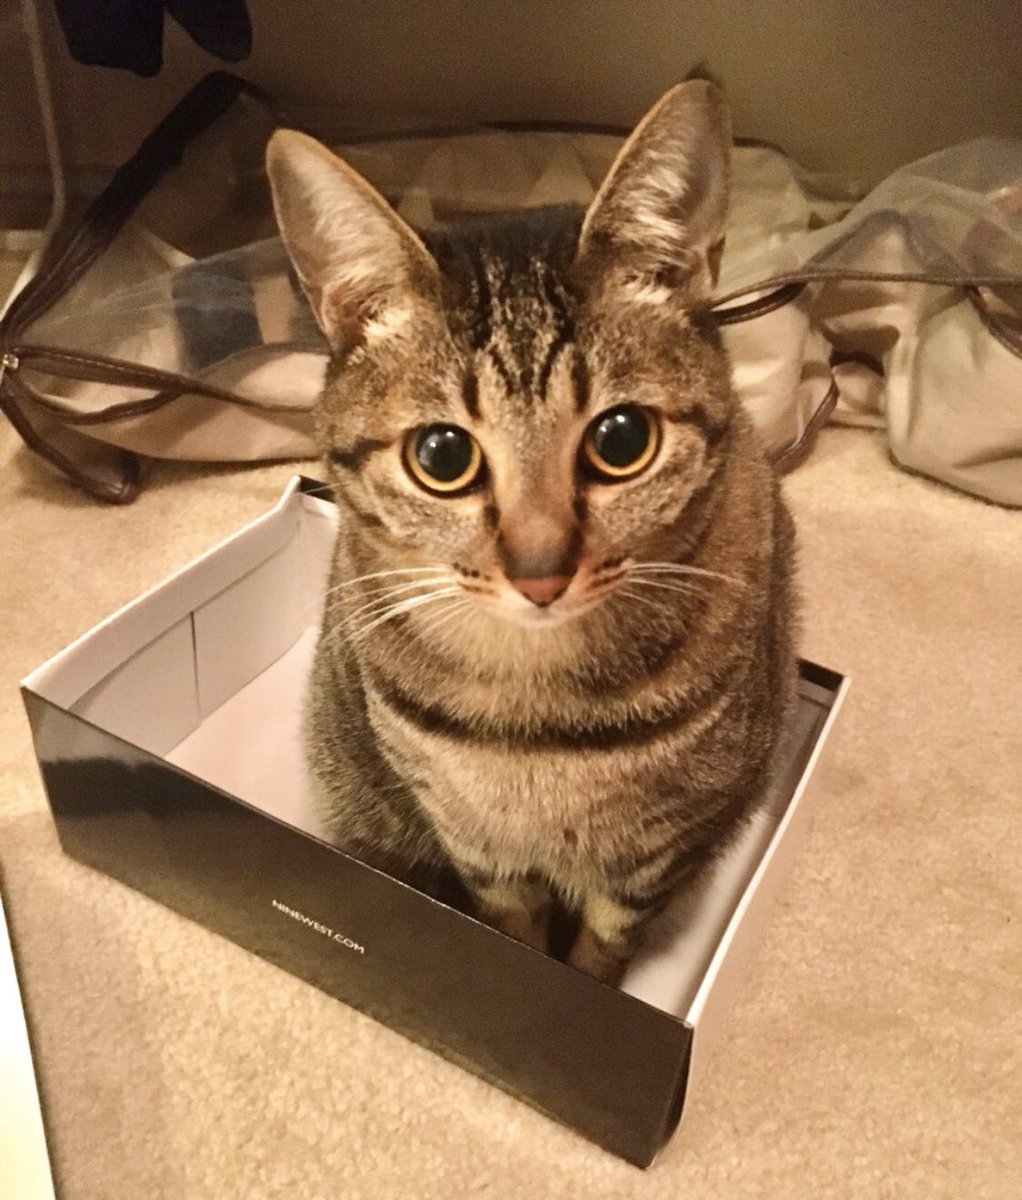 “That was JurJur, the most spoiled cat ever... she loves to sleep in shoe boxes and yowls when she wants to play  (all the time)”—  @AnneW0nderland